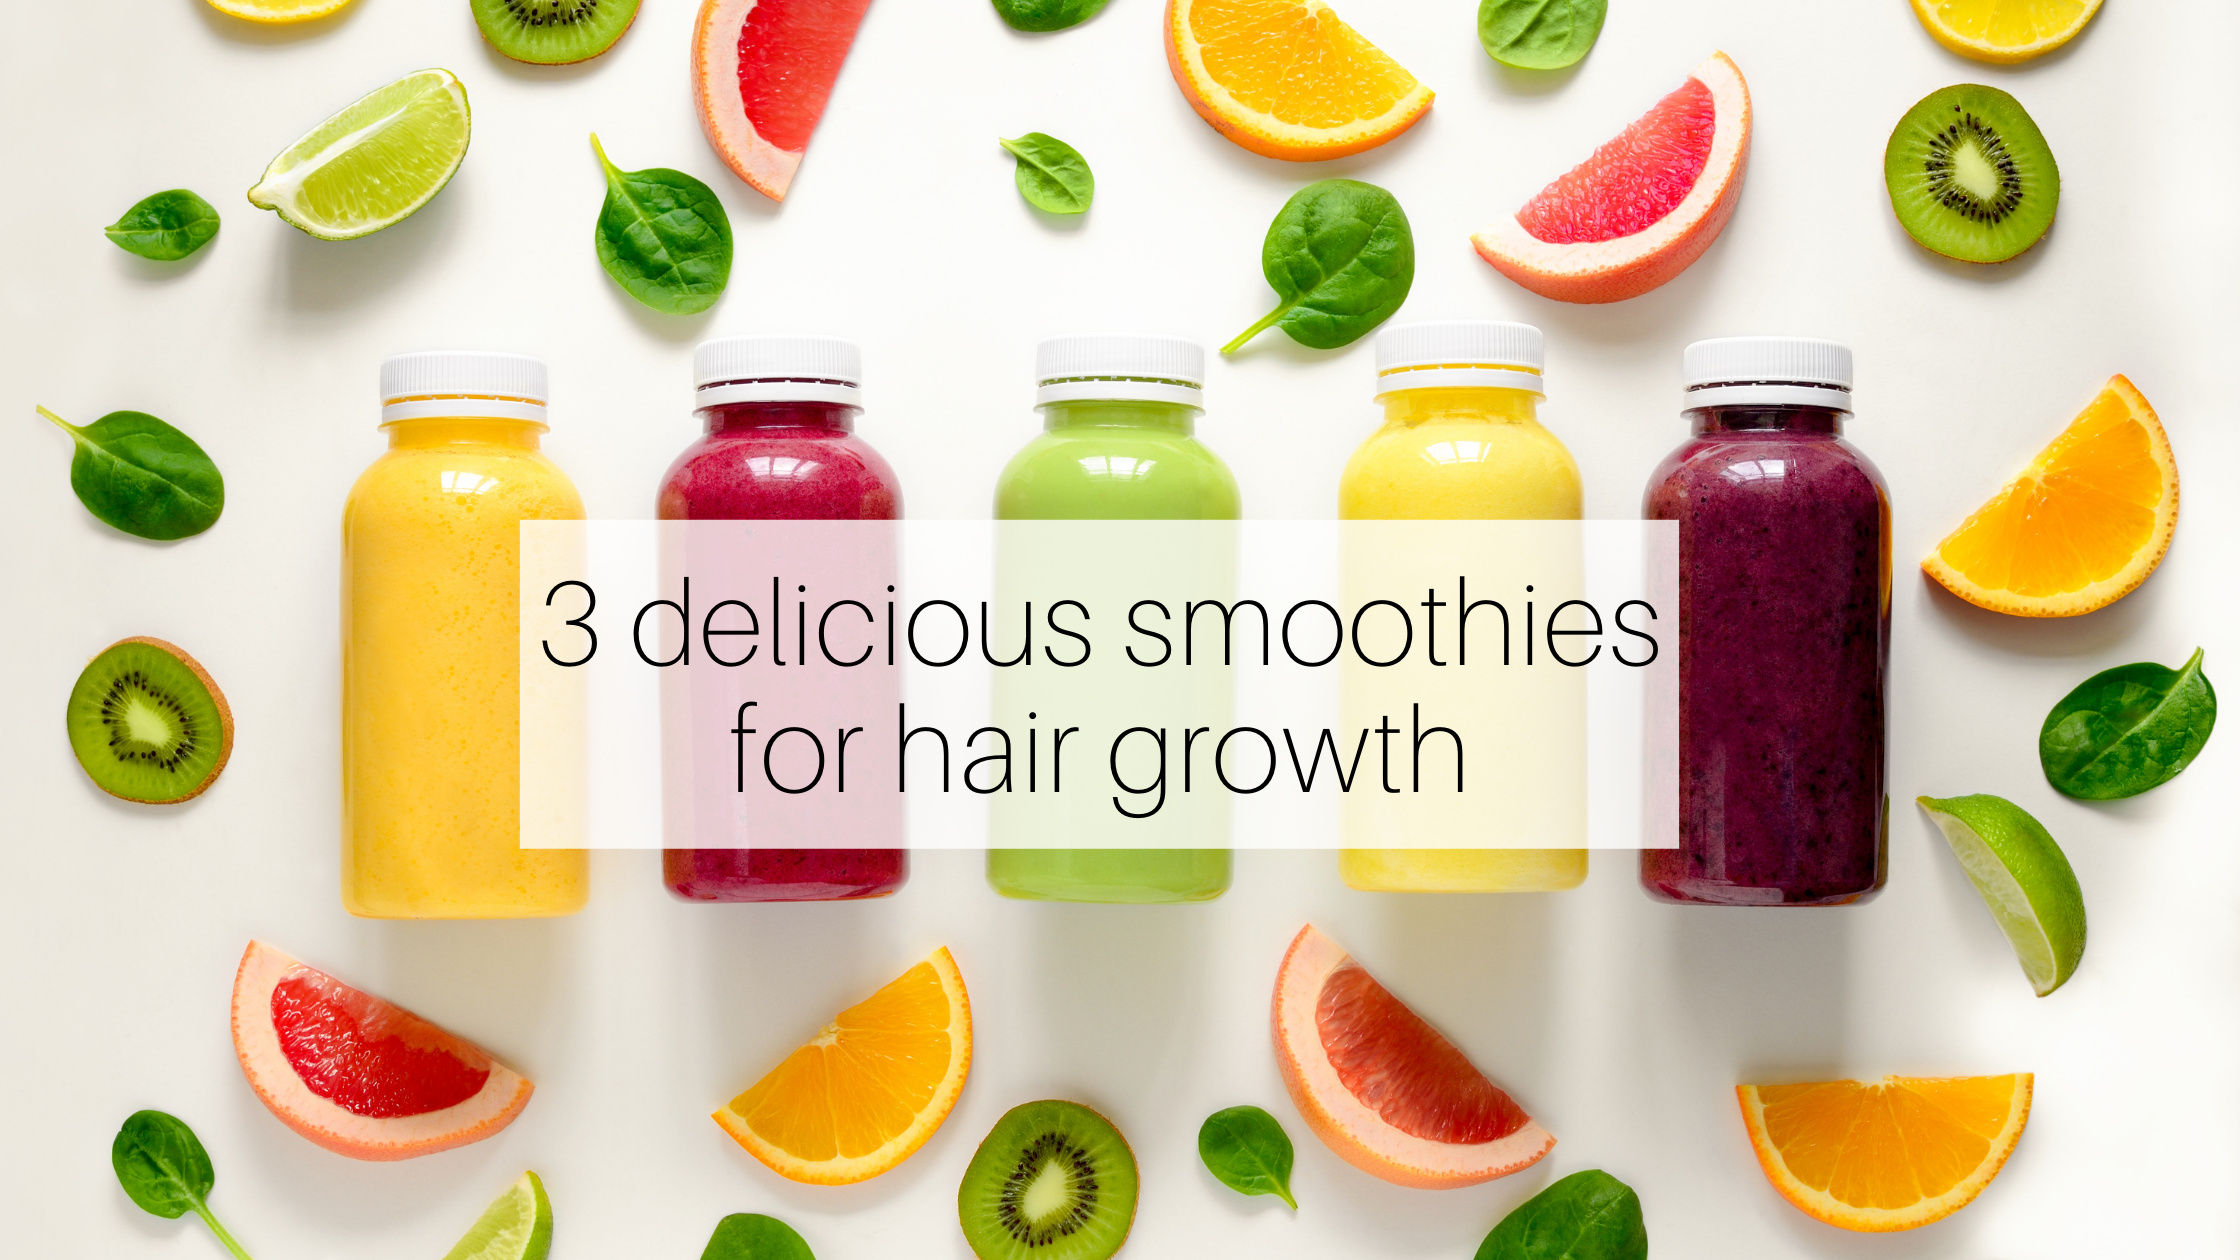 3 delicious smoothies you can incorporate for hair growth - Emerald City  Naturals